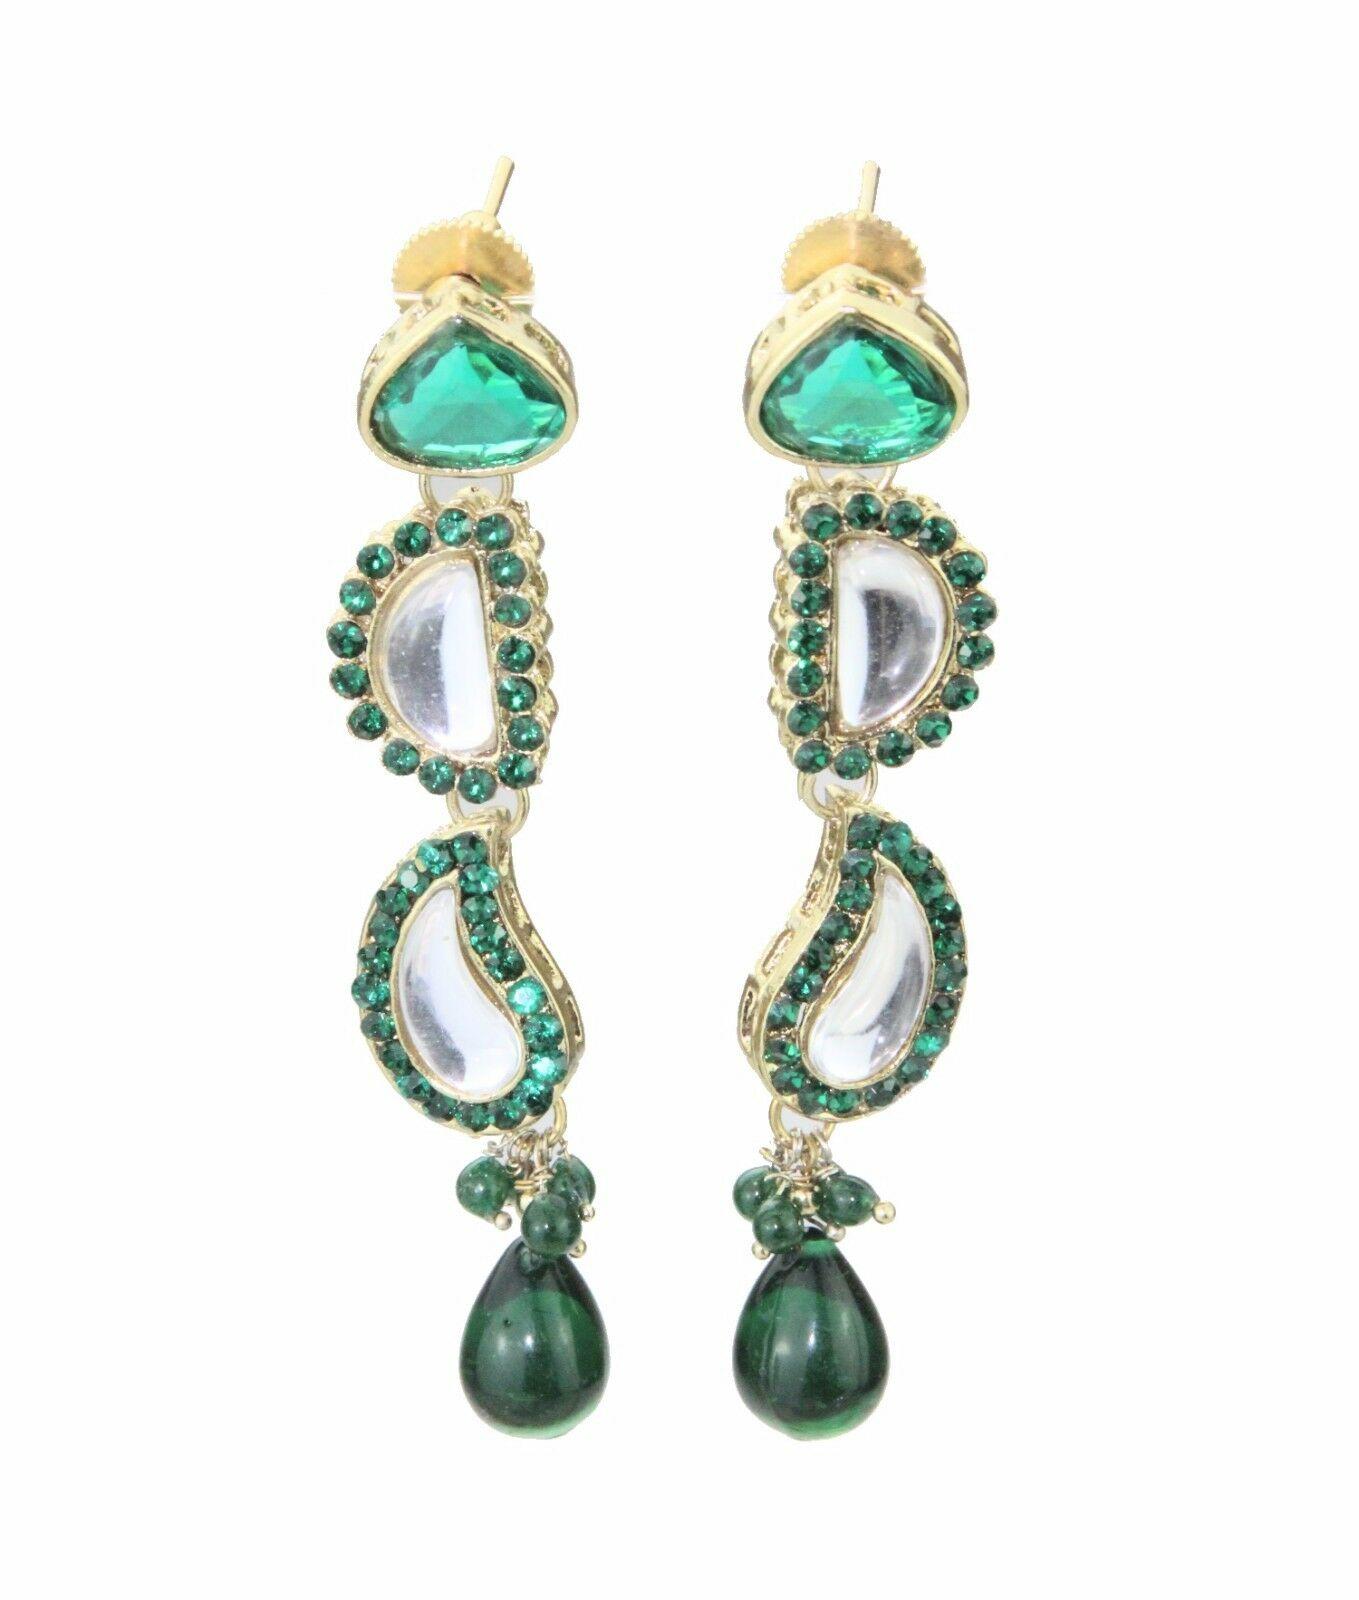 Details about   Beautiful Gold Tone Etched Black Glass and Green Jade Dangle Earrings.